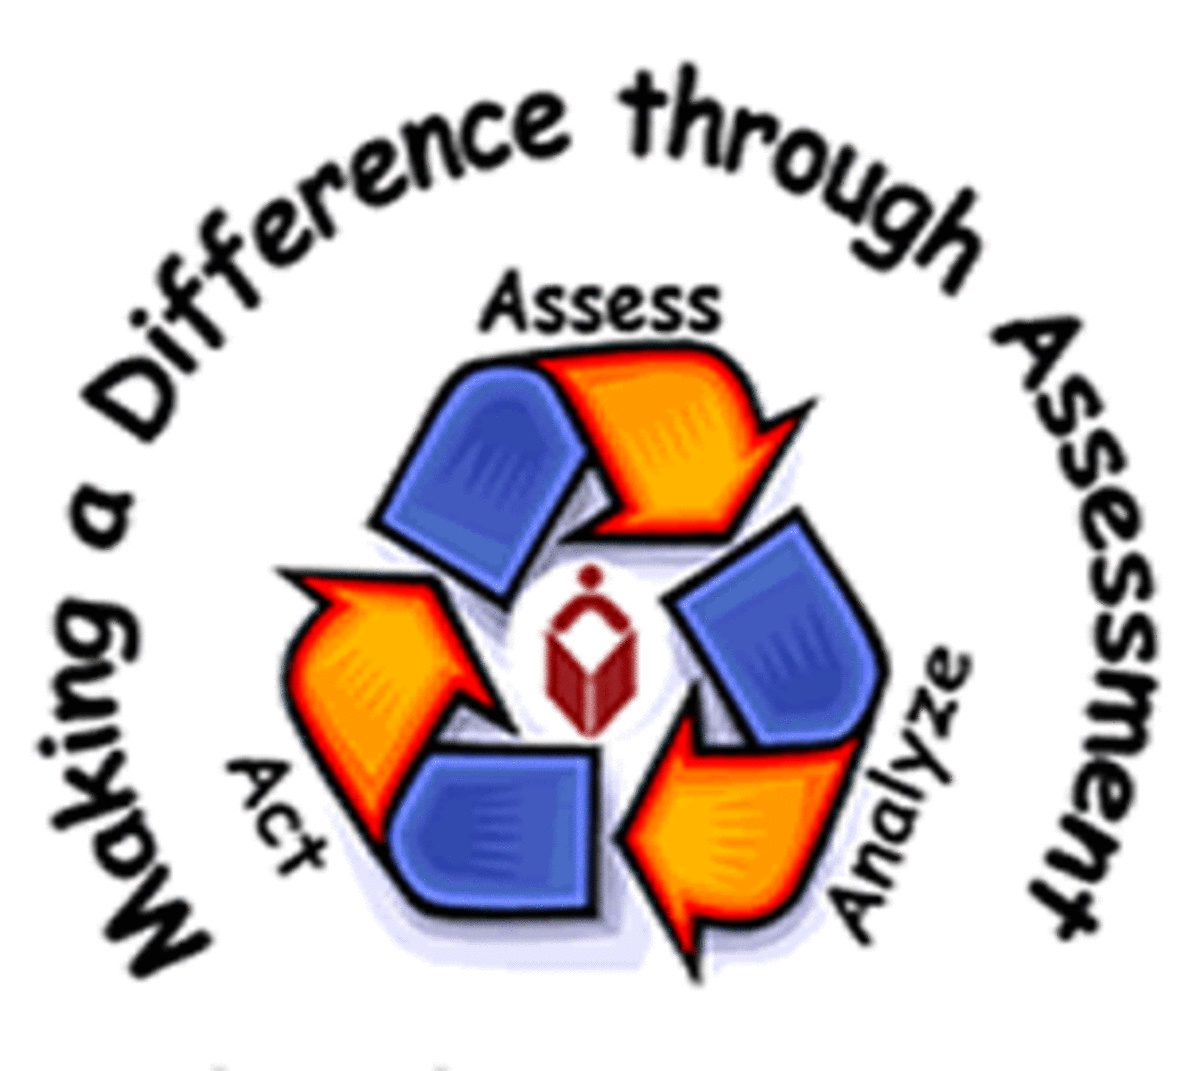 Making a difference through assessment